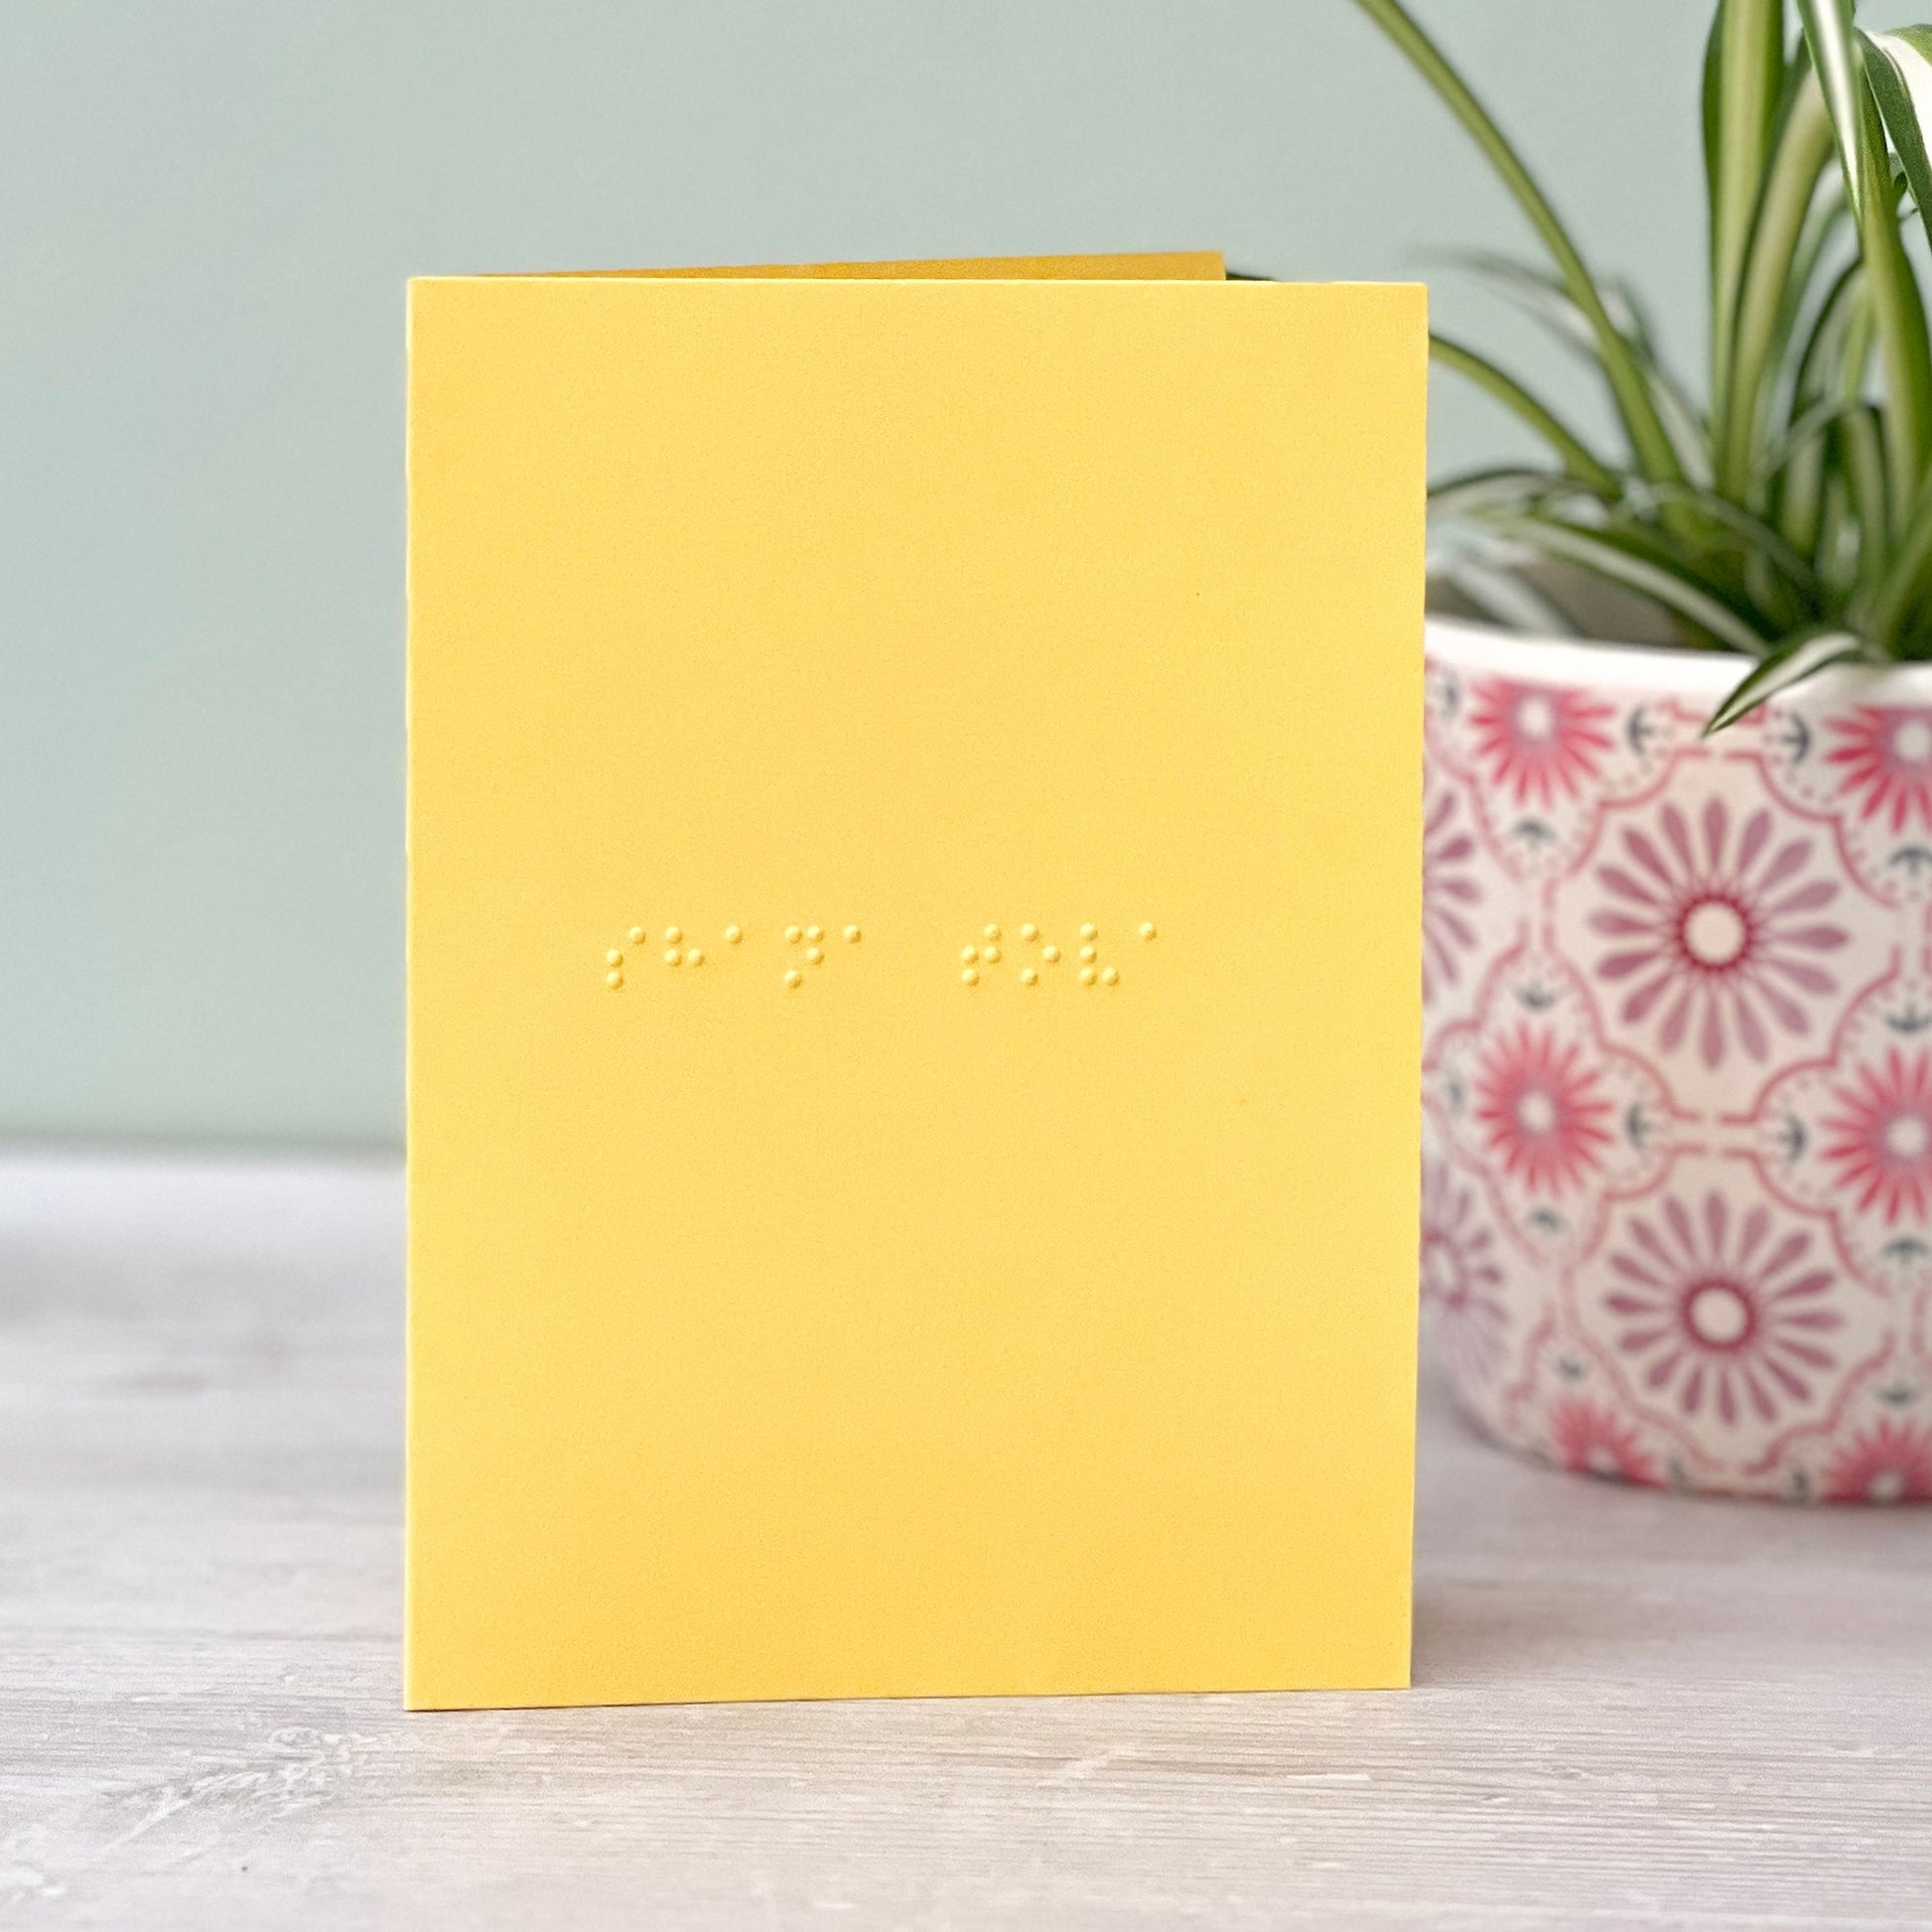 A vibrant yellow greetings card with shana tova written in grade 1 braille. There is a plant to the right of the photo.